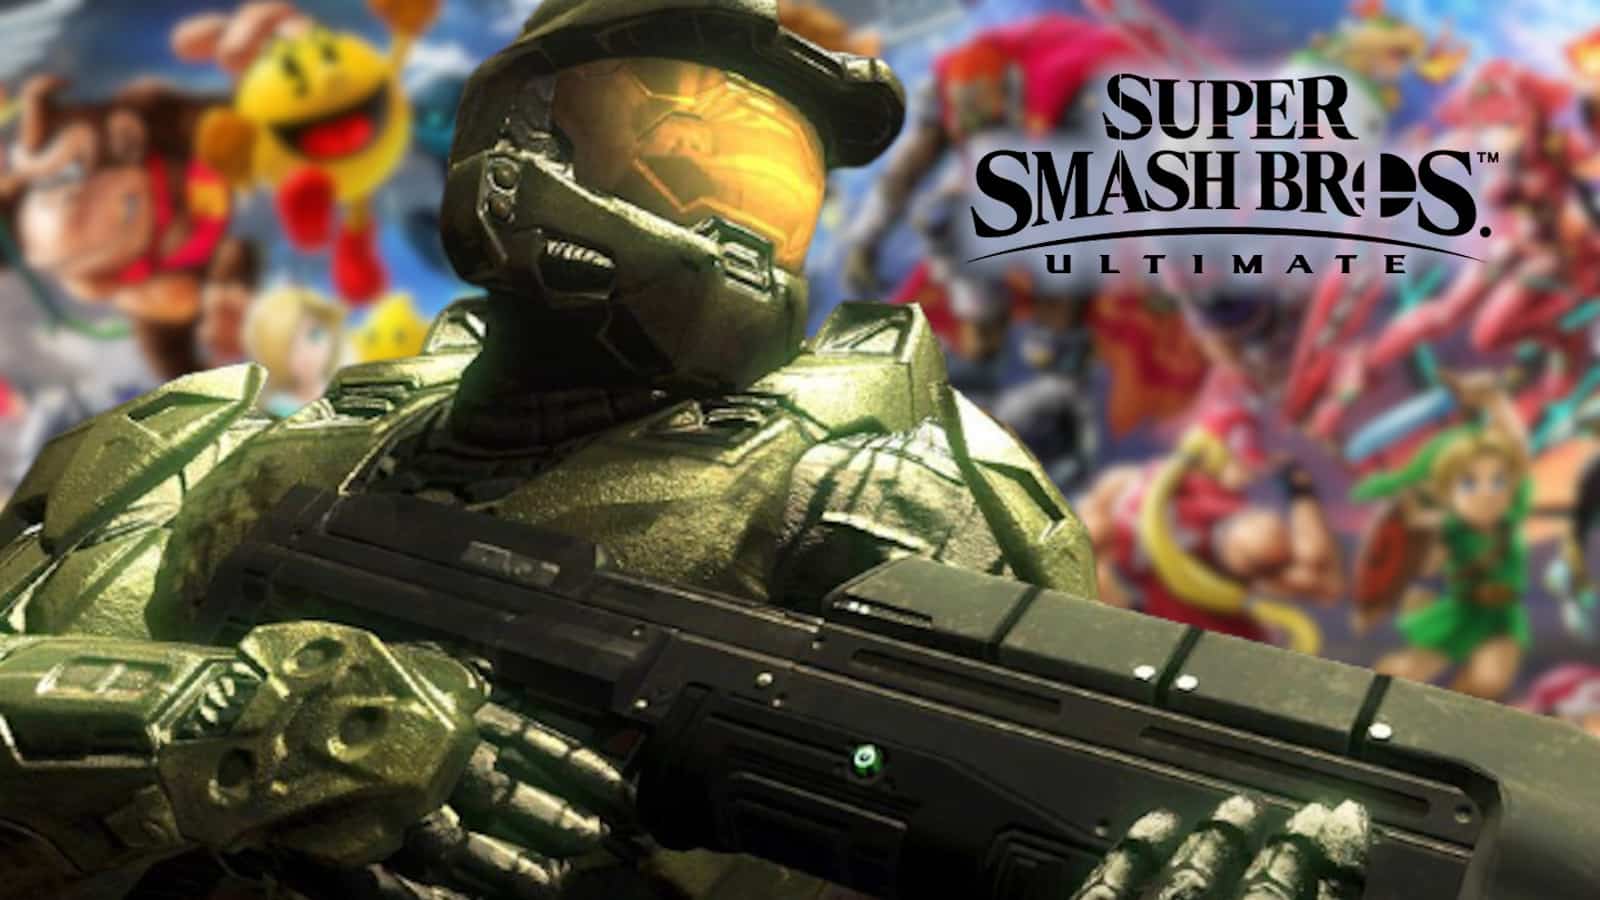 Master Chief in front of Smash mural